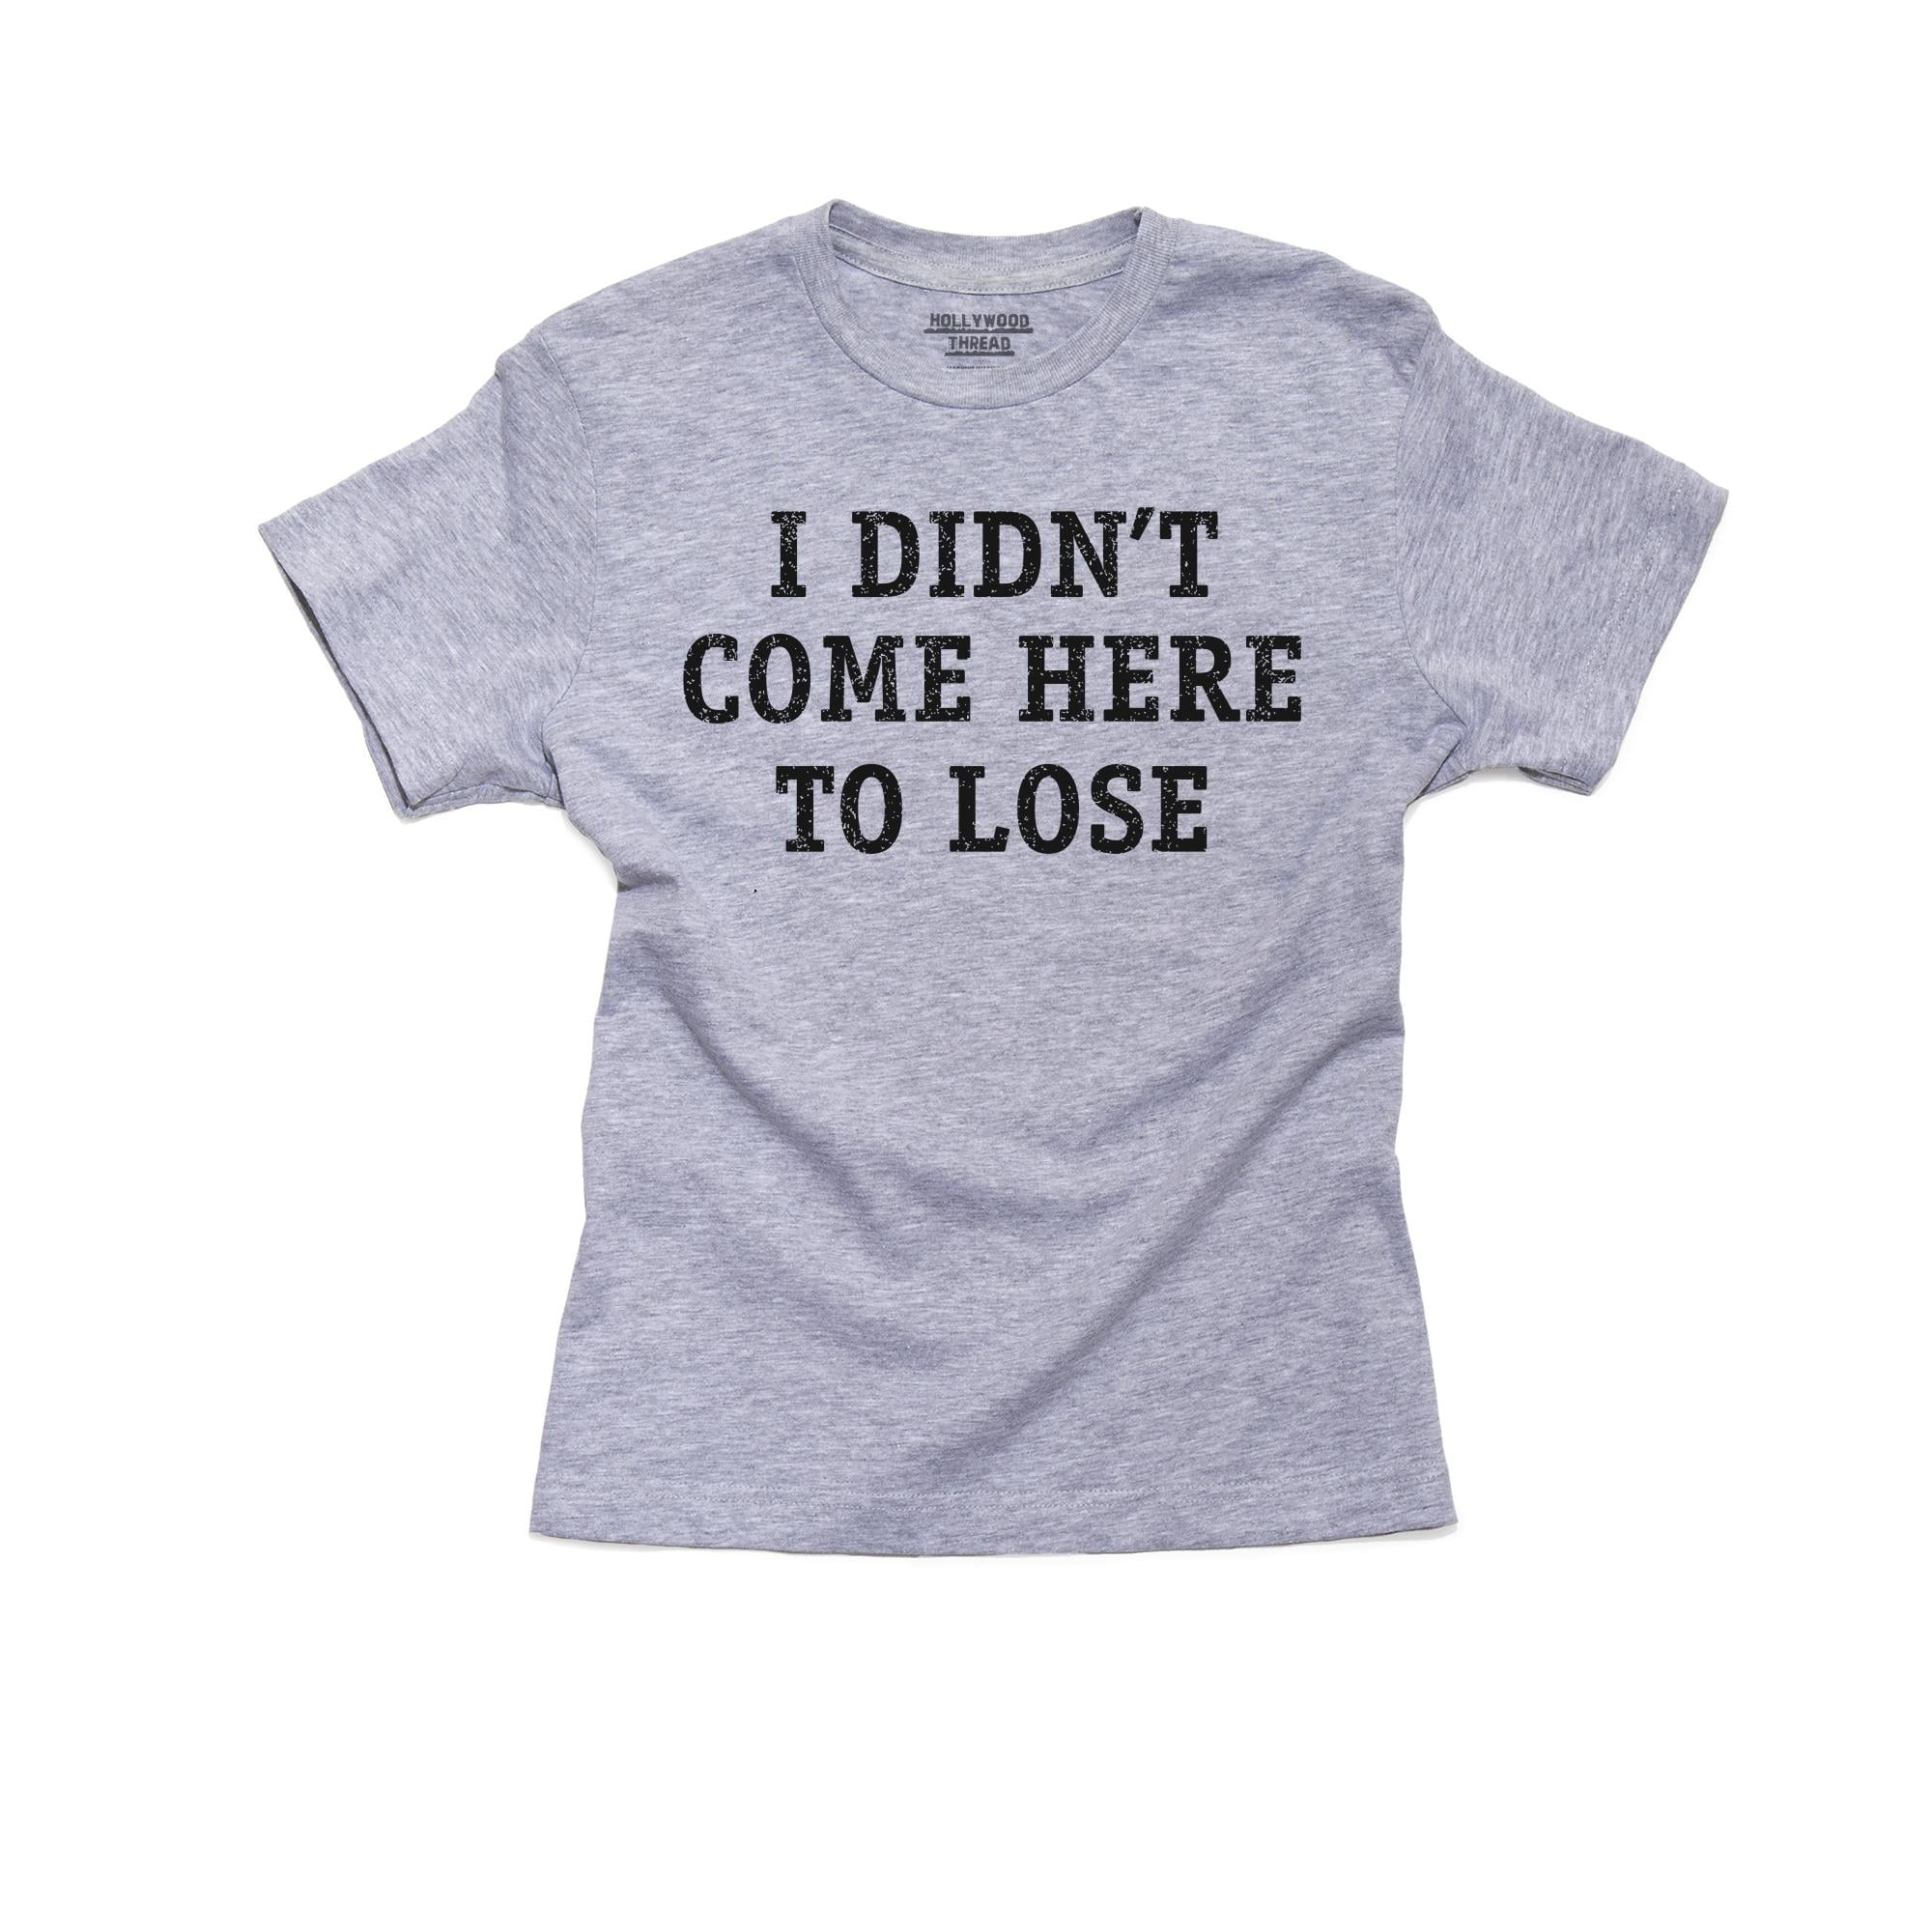 I Didn't Come Here to Lose! - Competitive Winner Boy's Cotton Youth T ...